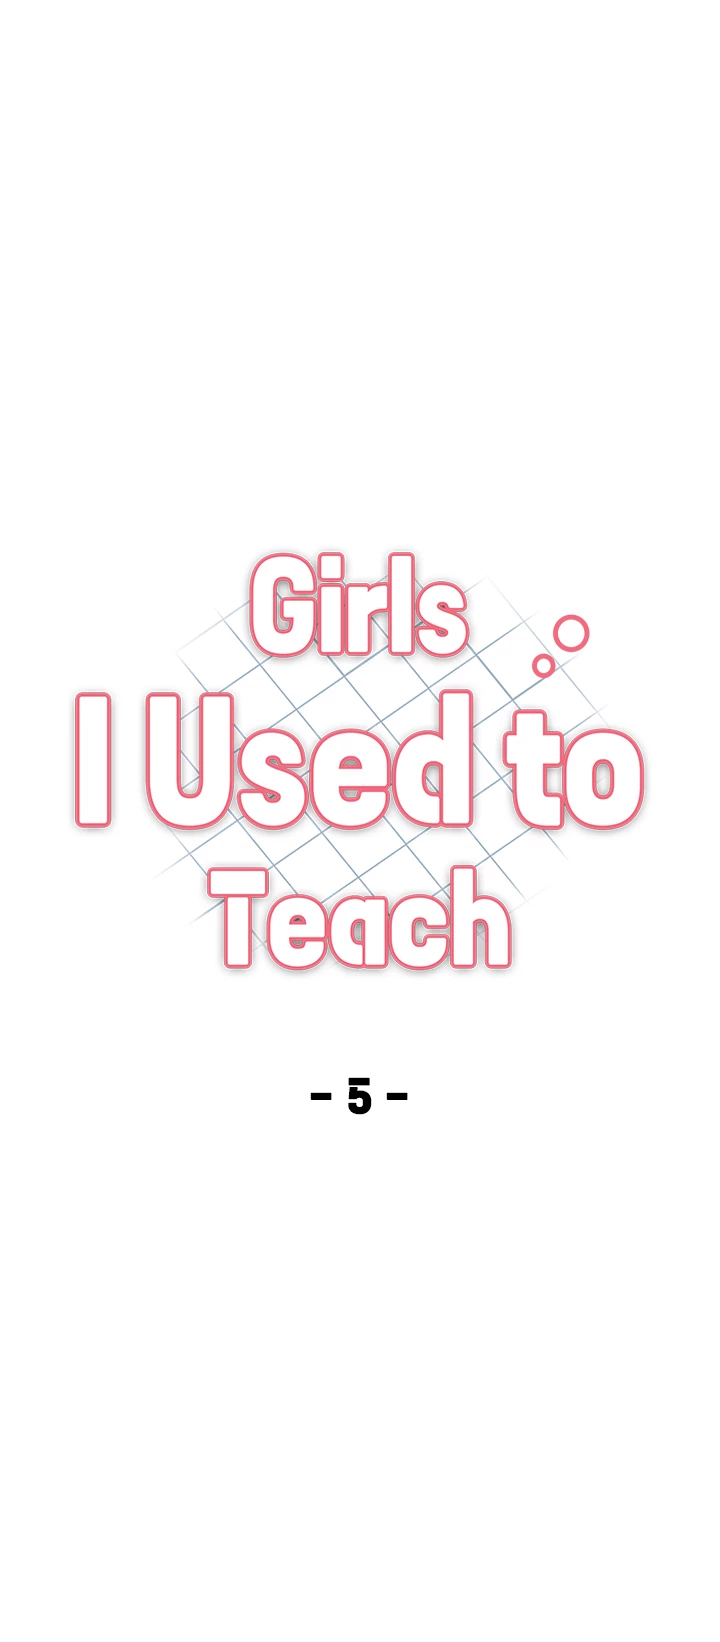 Girls I Used to Teach NEW image